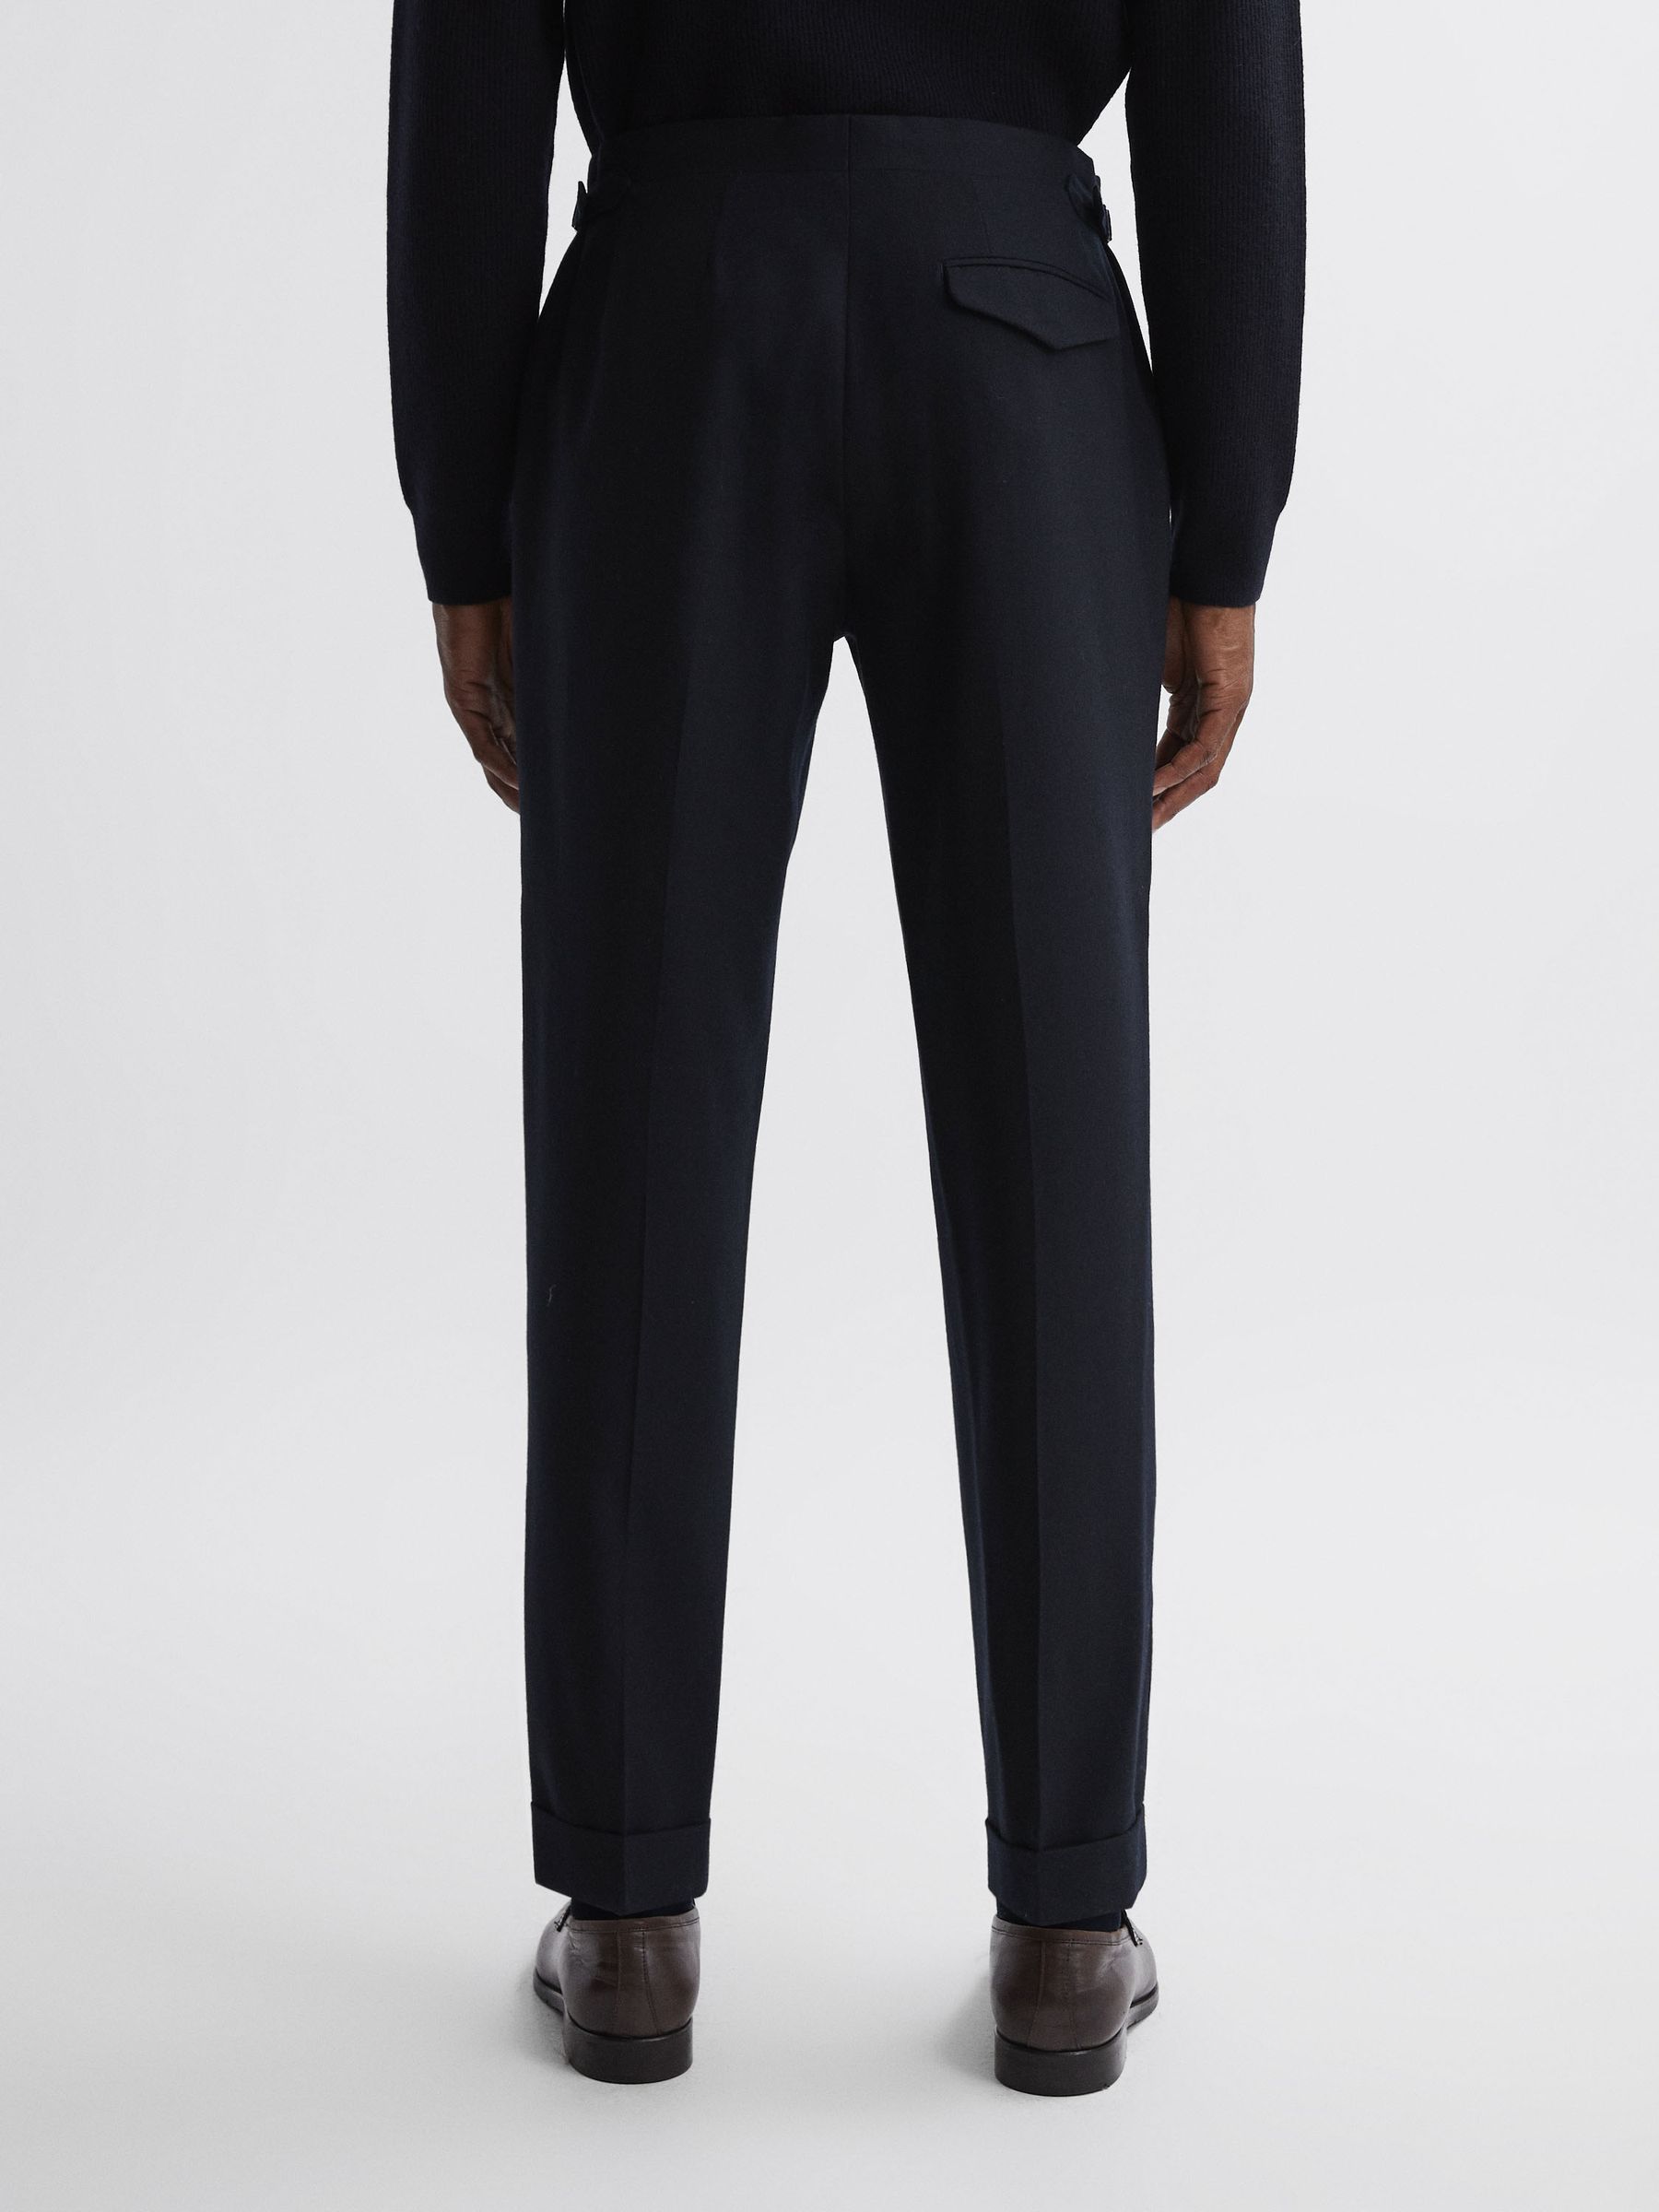 Reiss Beadnell Slim Fit Brushed Wool Trousers | REISS USA